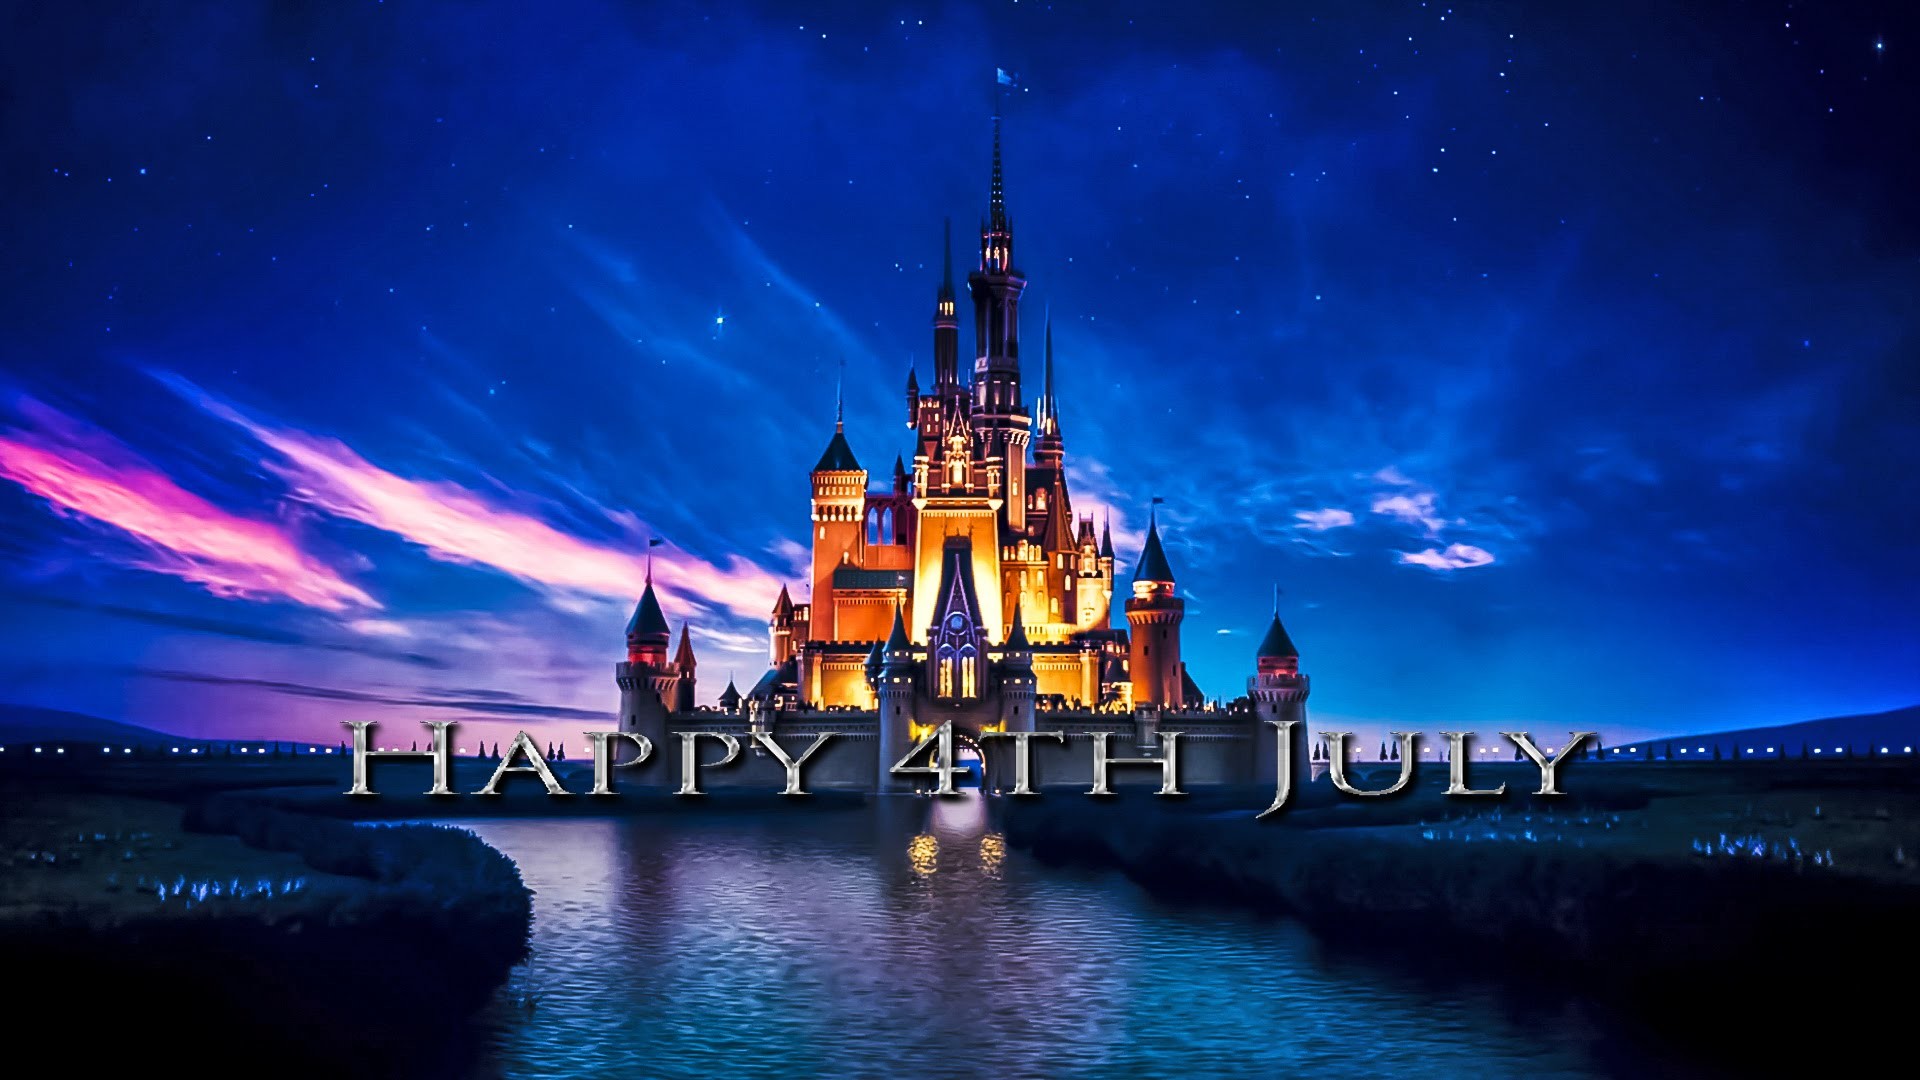 1920x1080 Disney Castle Flies The Stars And Stripes For The 4th Of July - small